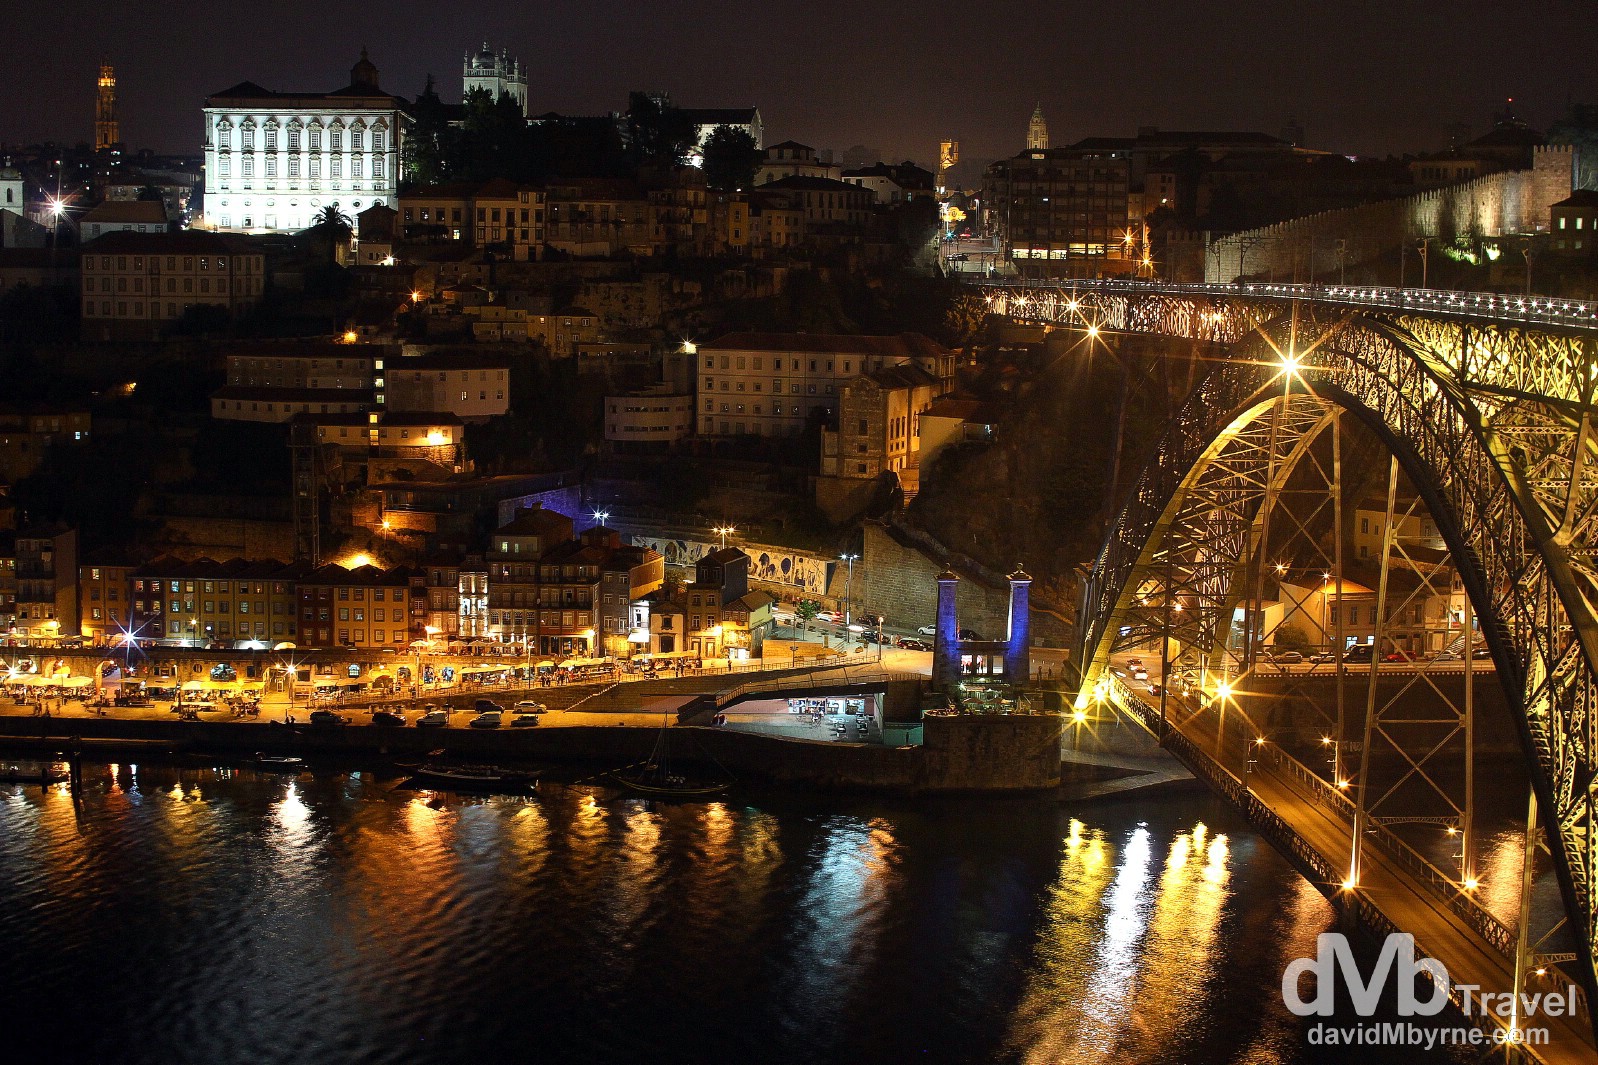 I didn't find Porto as photogenic at night as I found Lisbon but I did like this night time view, a view of the Douro River, Ponte D. Luis I bridge & the historic centre of Porto as seen from the Jardin do Morro in the Gaia district of the city. August 28th 2013.